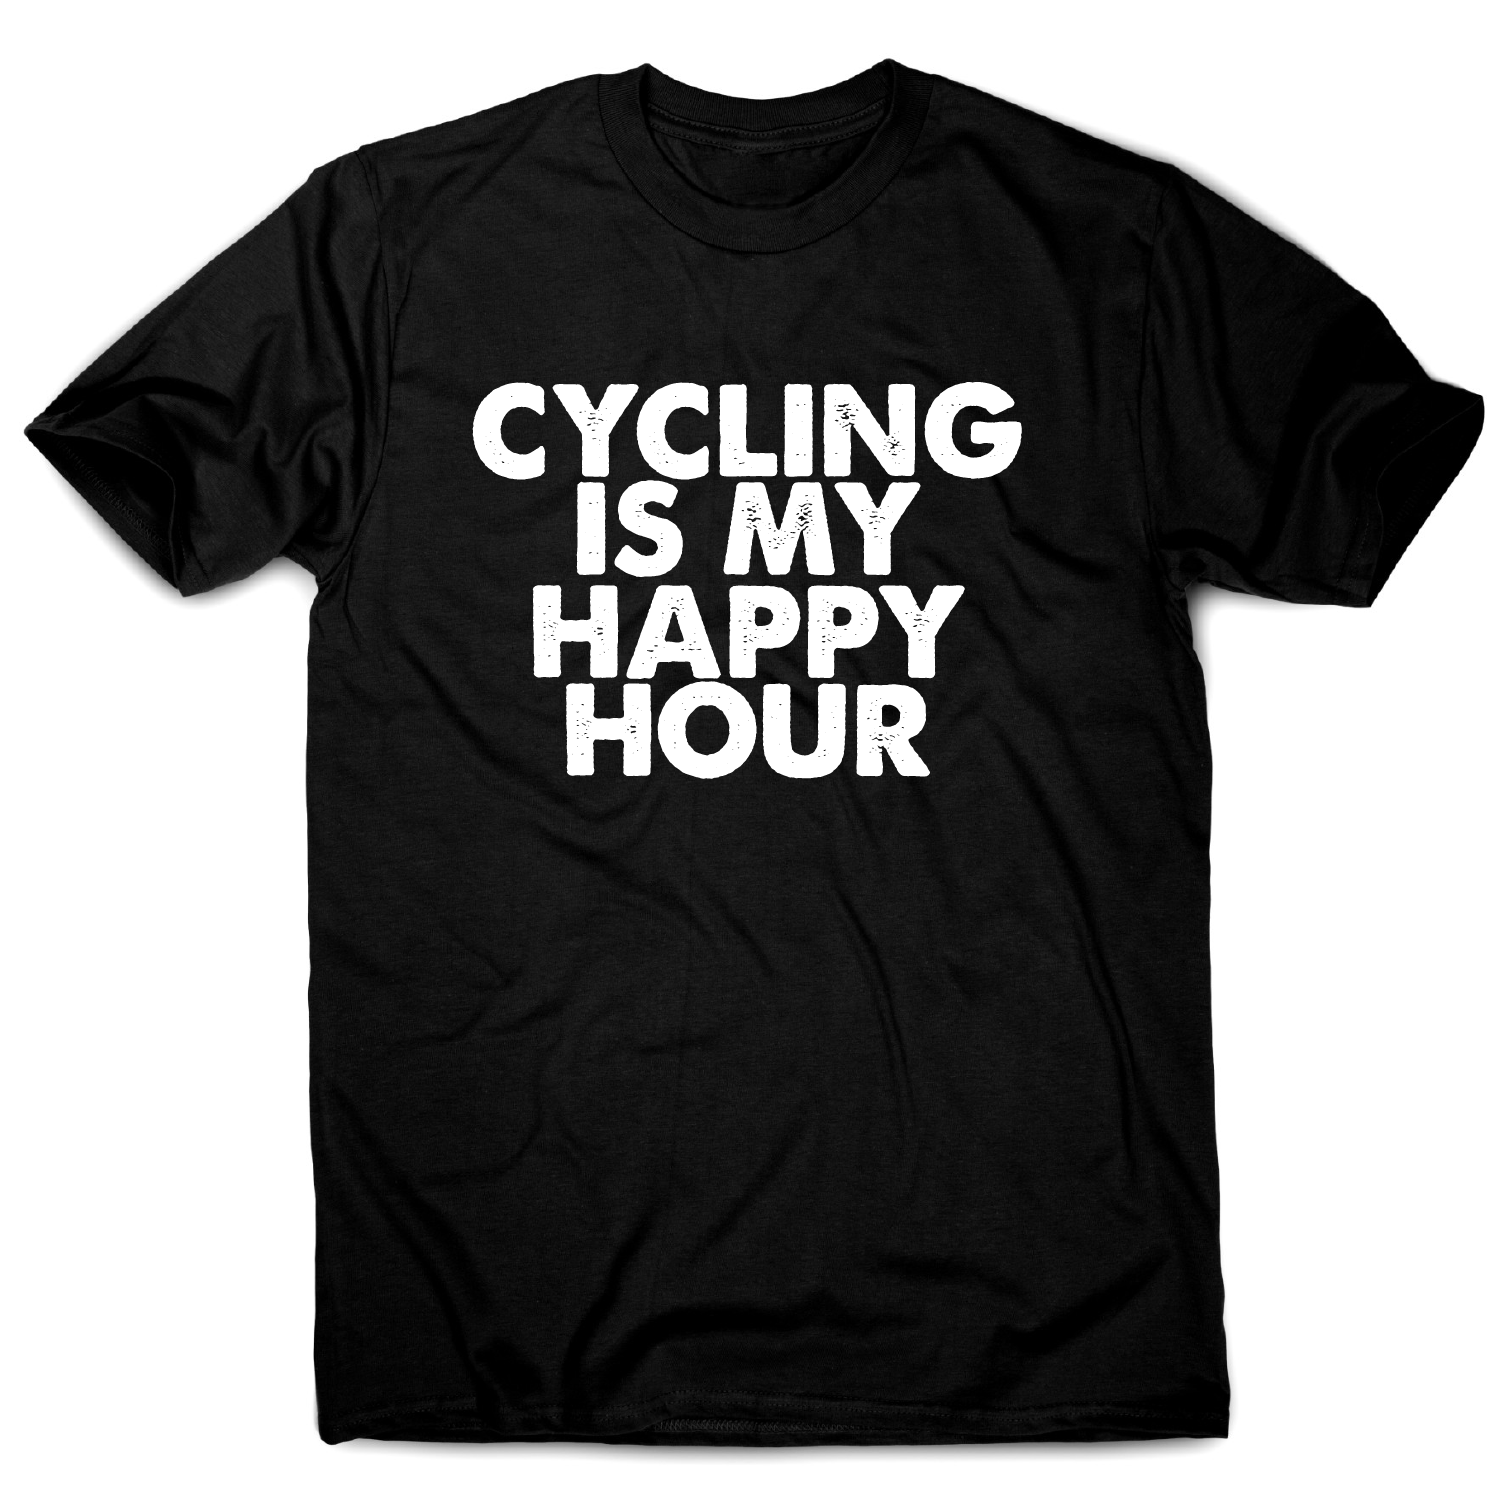 Funny slogan T shirts | Funny T shirts for men | Cycling is my happy ...